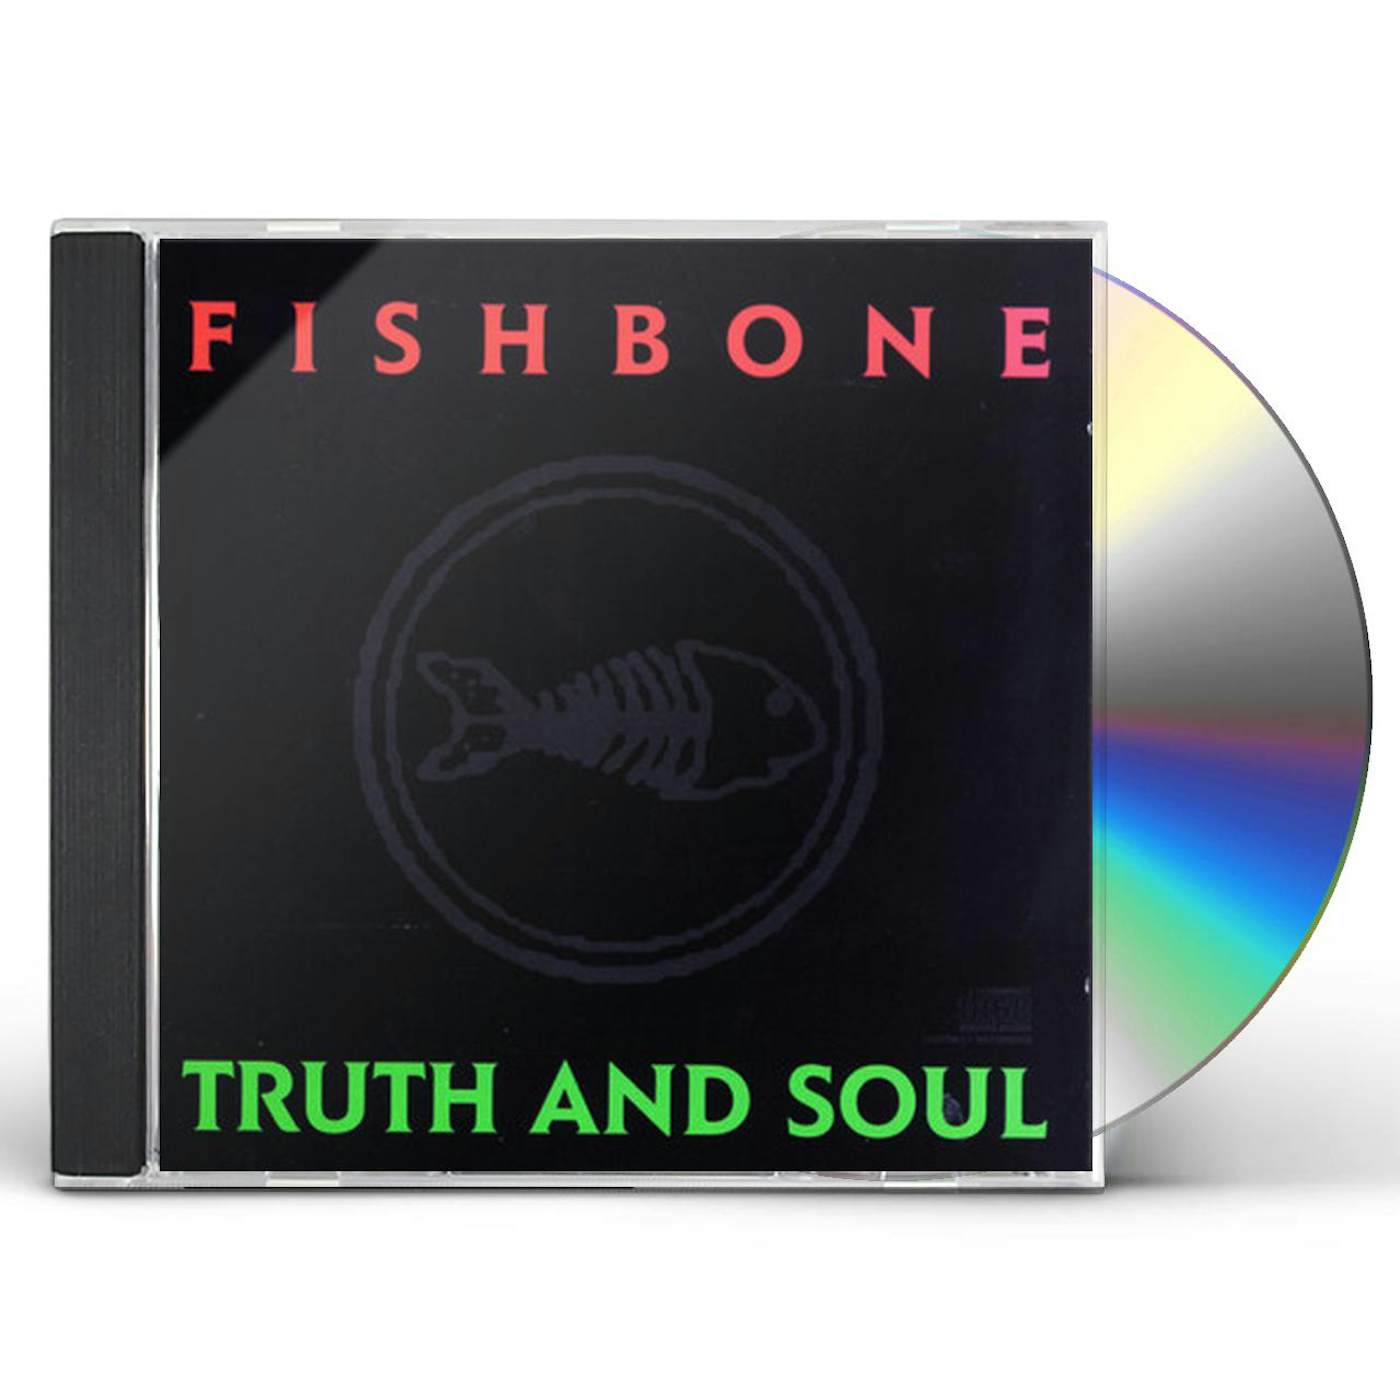 Fishbone - Truth And Soul on Music On Vinyl Reissue